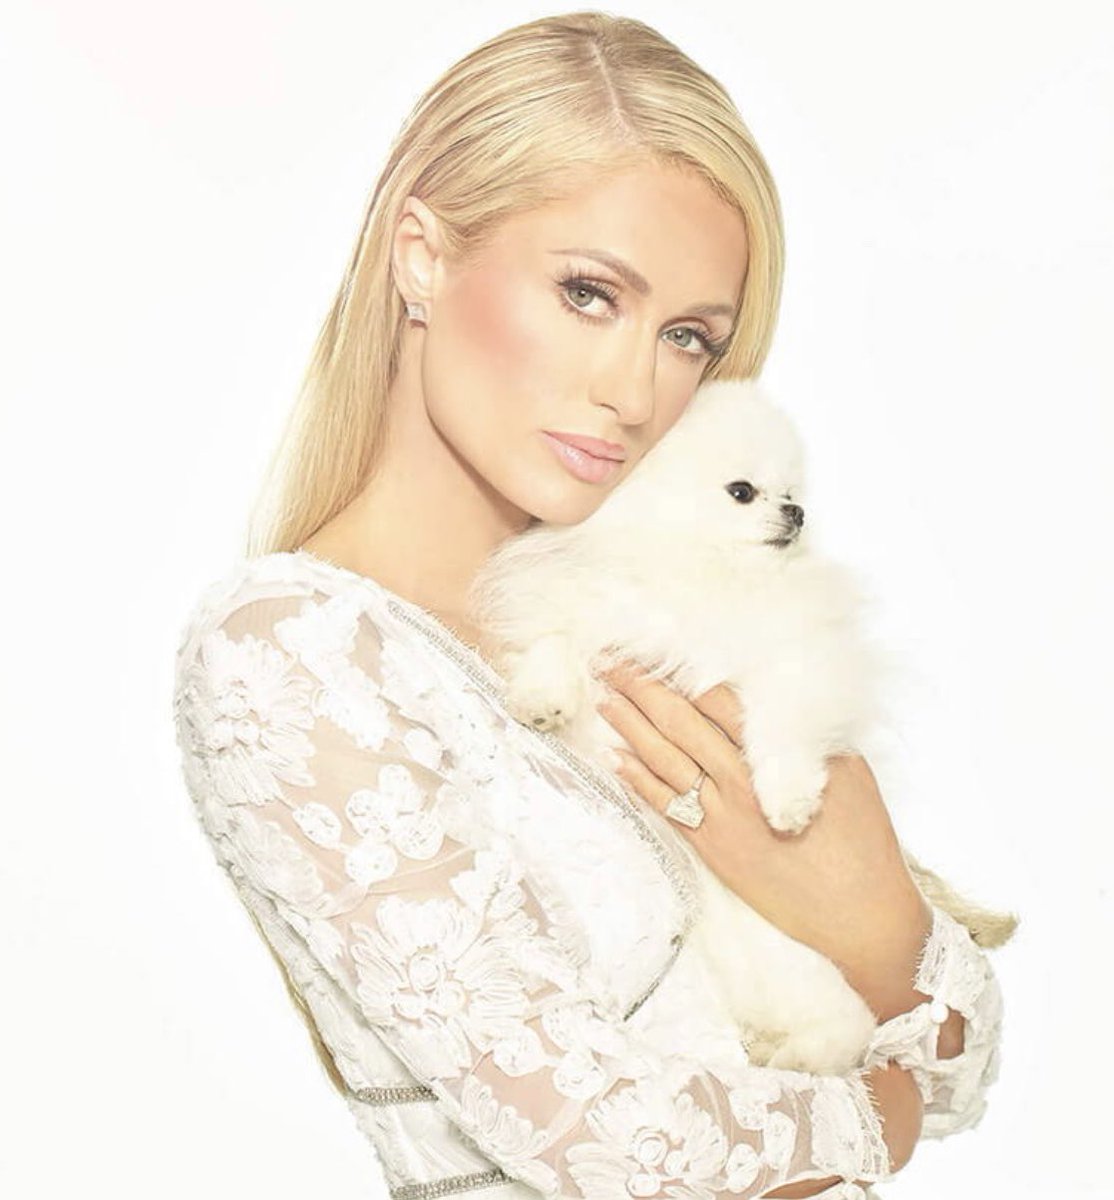 @ParisHilton 💫So Many💫 “I knew IT wasn’t true. I knew I was a HILTON” #mindset is EVERYTHING 💫🎶💫 so excited about your upcoming 💖🎵💖#hiltonfortheSLAY #ParisTheMemoir